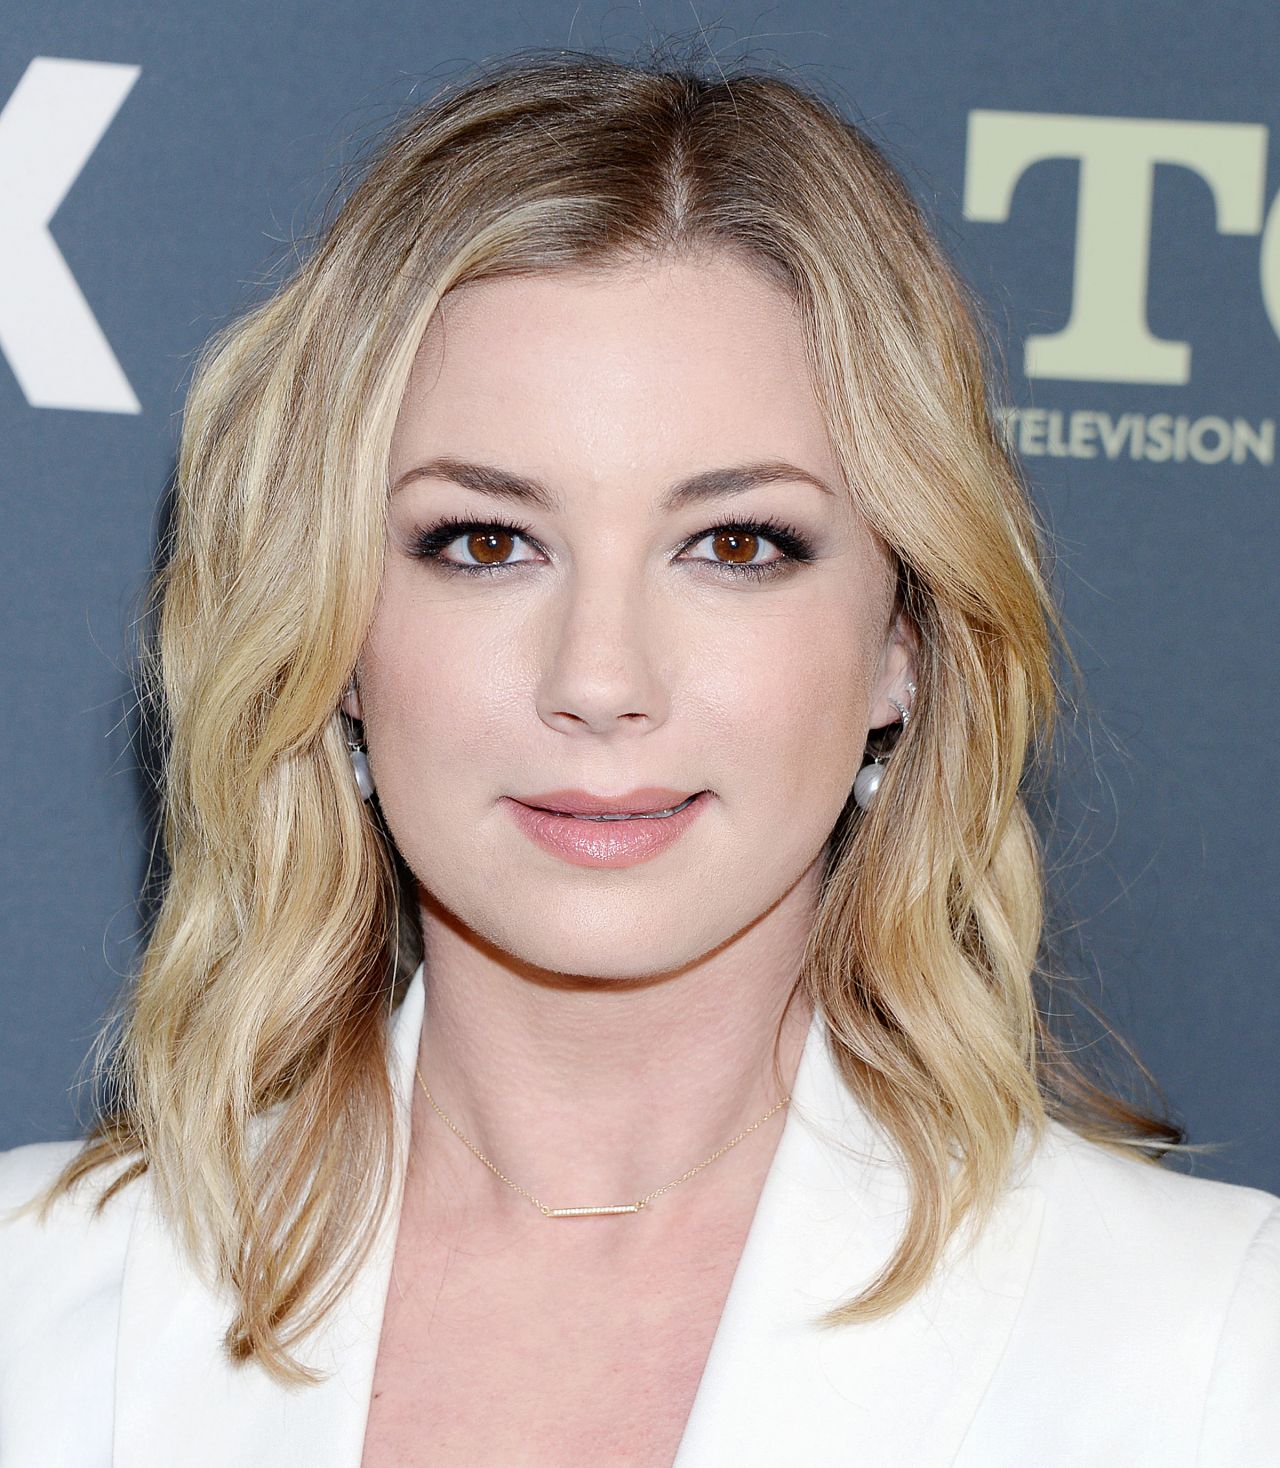 Emily VanCamp Biography - Facts, Childhood, Family Life 